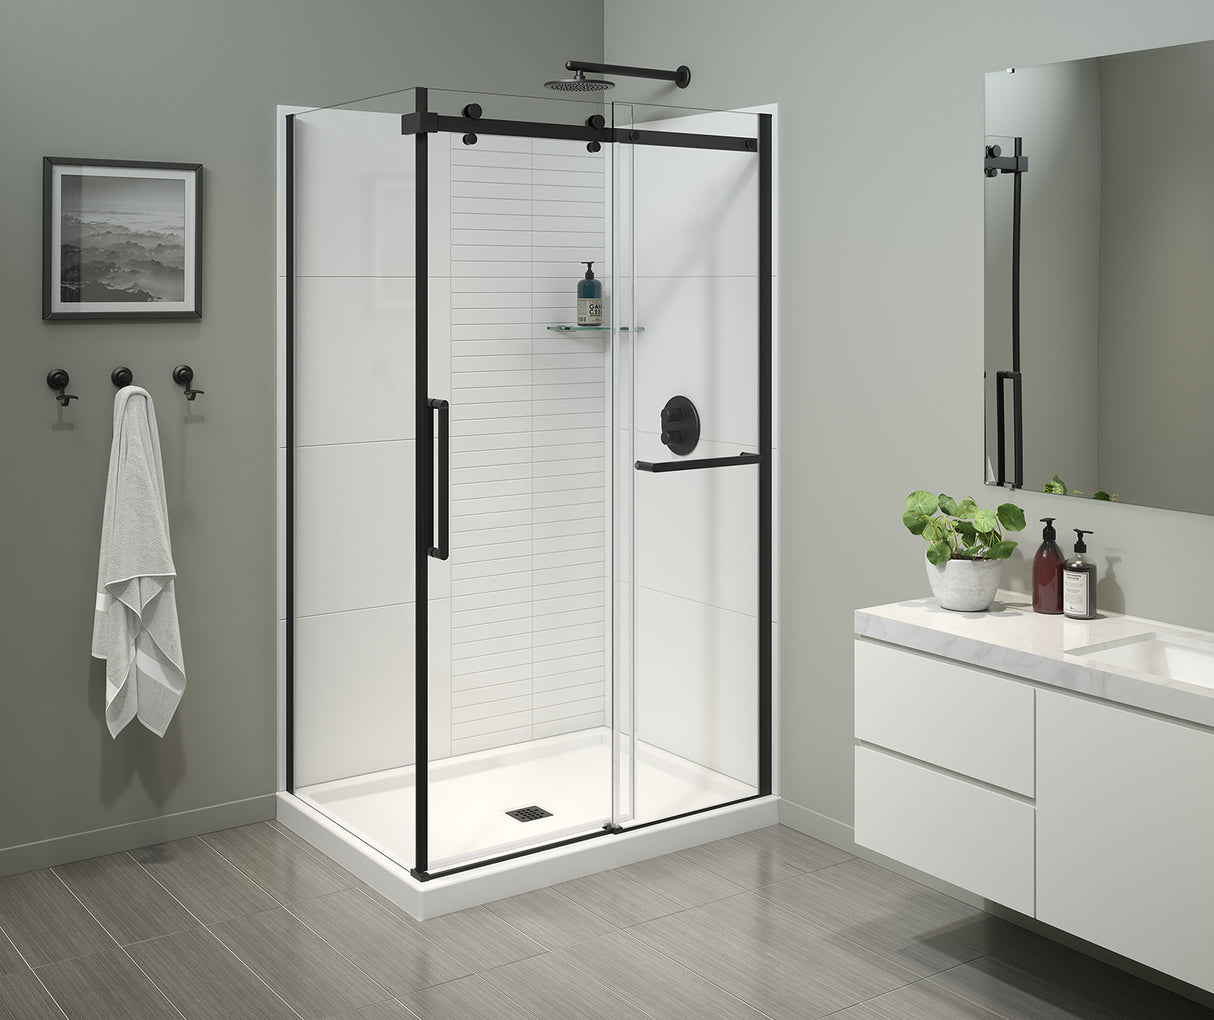 MAAX 138954-900-340-000 Halo Pro 44 ½-47 x 78 ¾ in. 8 mm Sliding Shower Door with Towel Bar for Alcove Installation with Clear glass in Matte Black